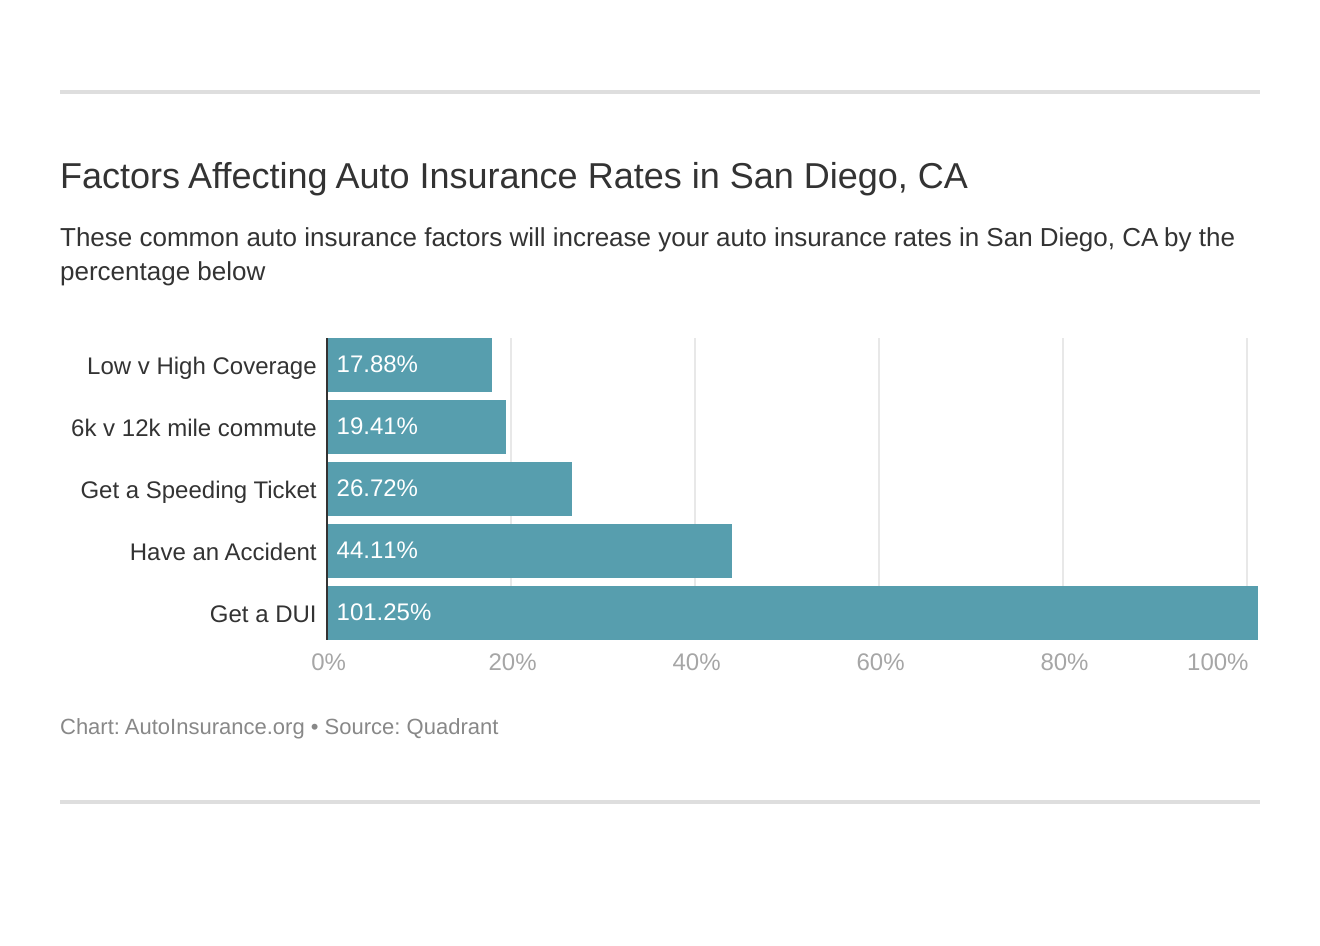 Factors Affecting Auto Insurance Rates in San Diego, CA